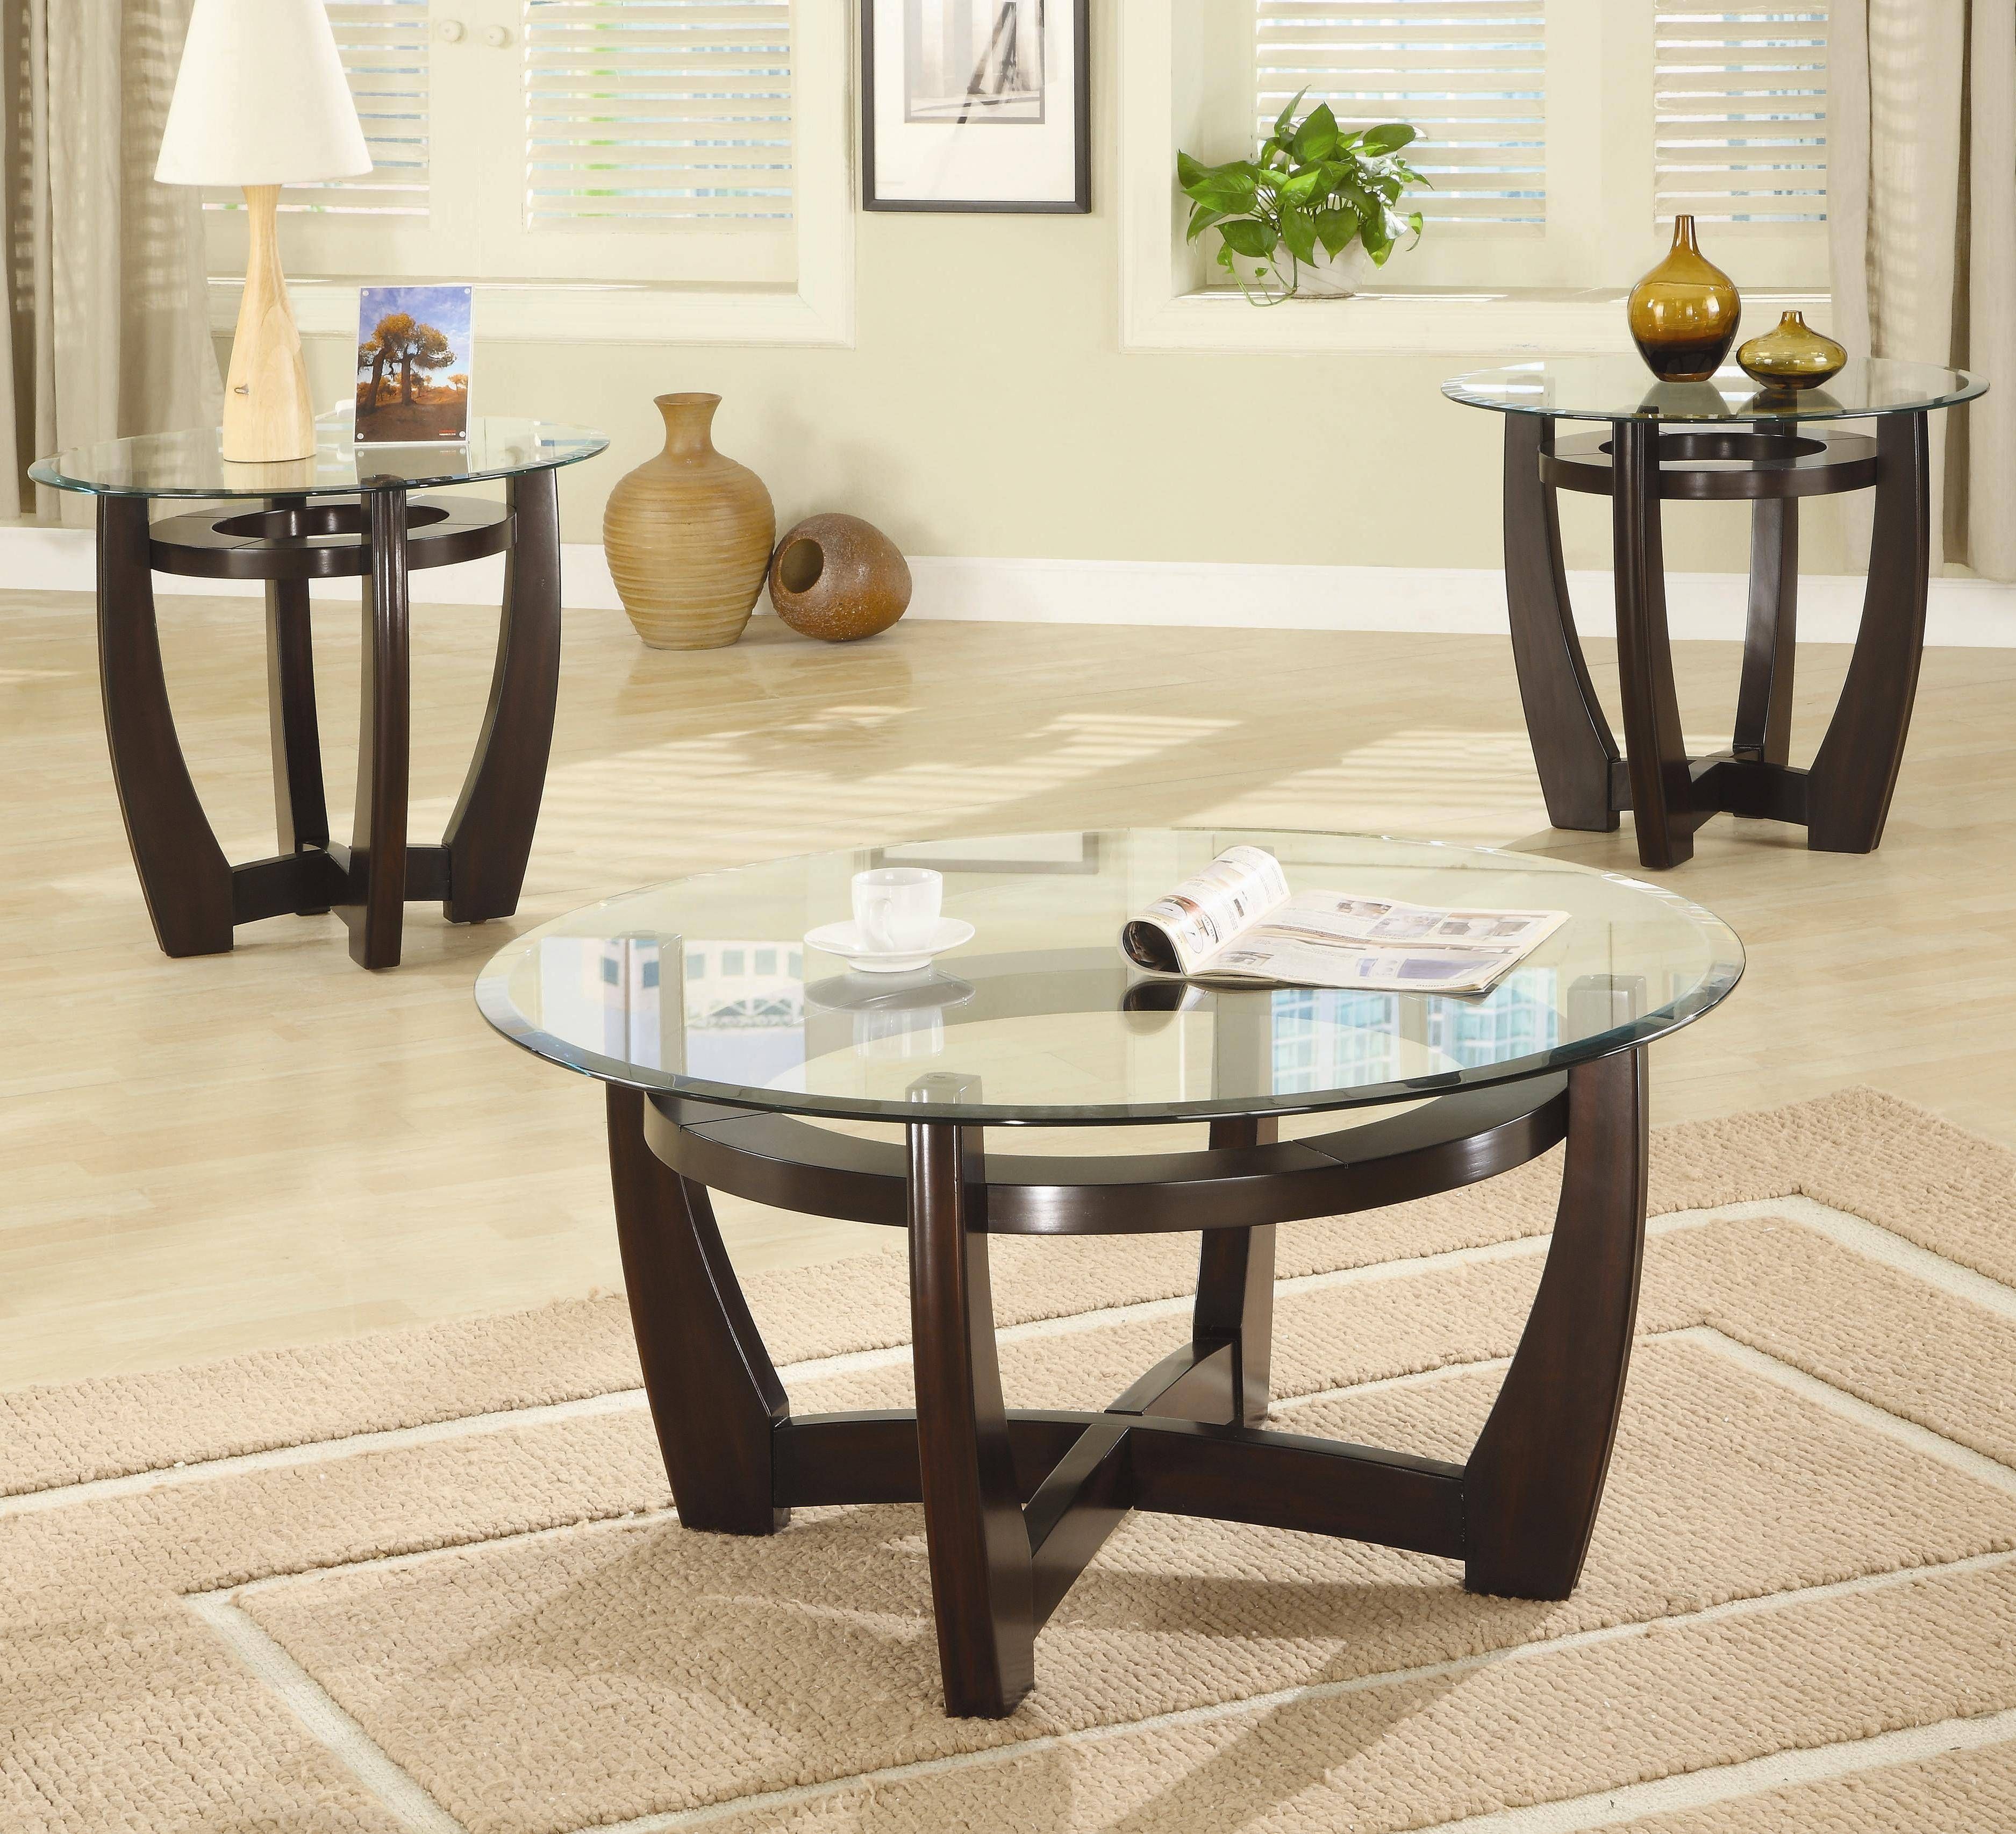 Coaster Occasional Table Sets Modern Coffee Table And End Table Within Coffee Table With Chairs (View 11 of 30)